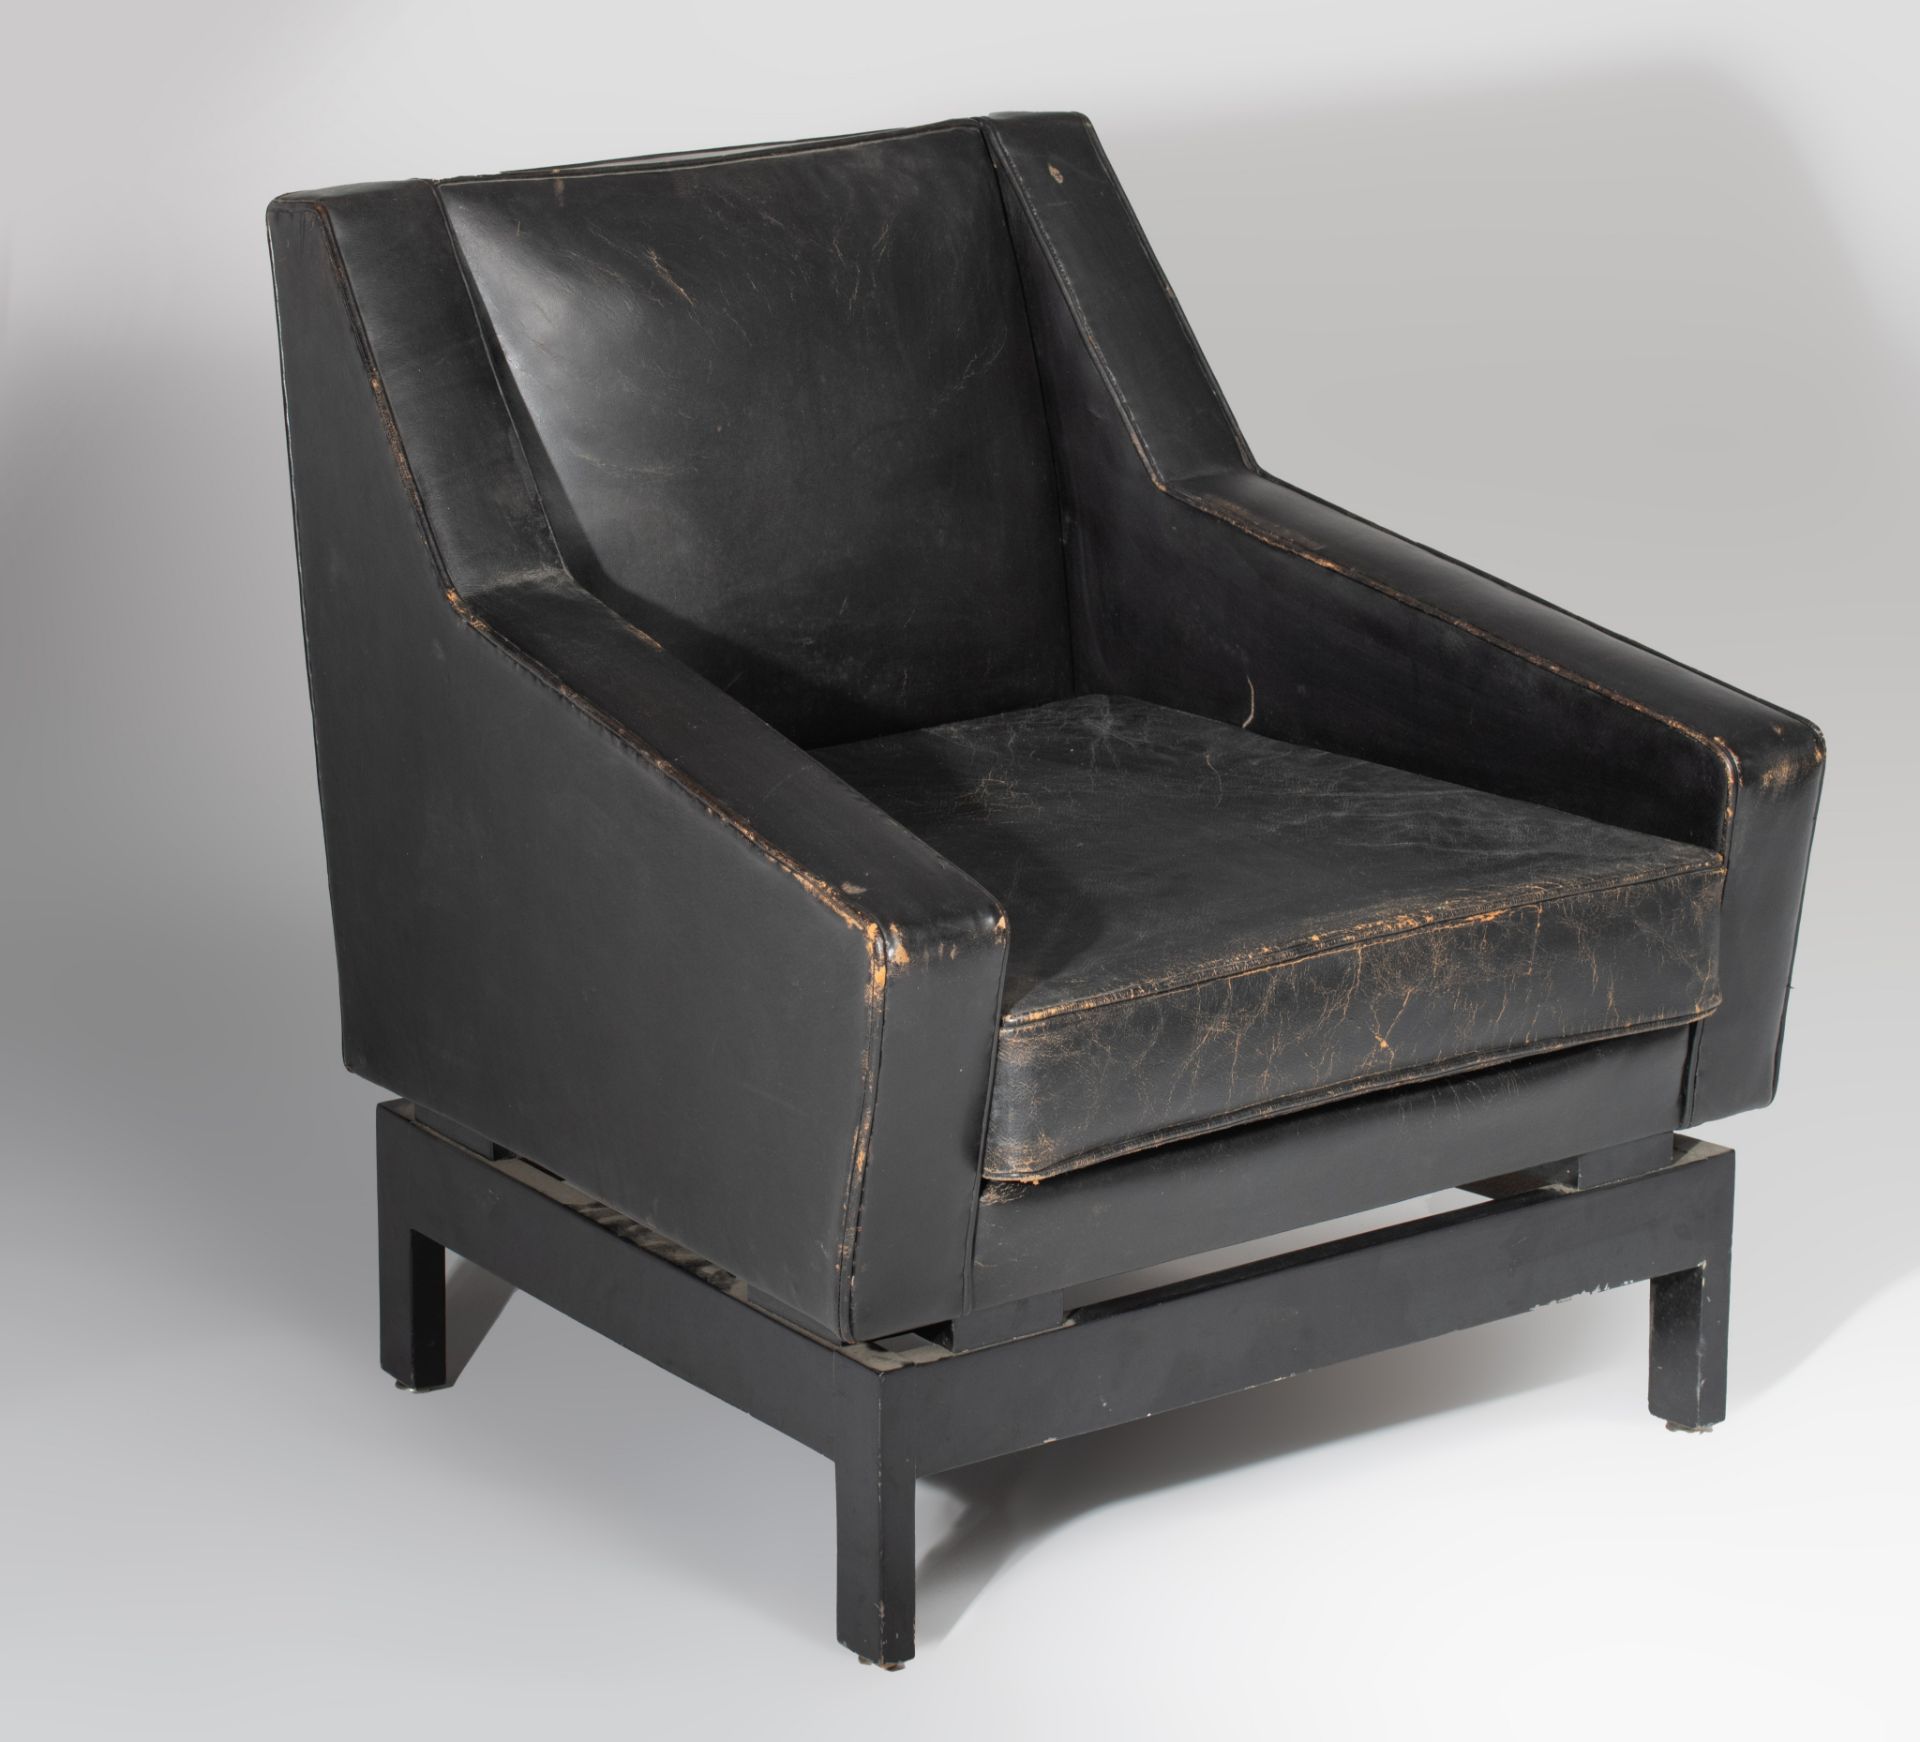 A Verraneman armchair, black leather on a black lacquered wooden frame, 1957, H 76 - W 72 cm - Image 3 of 11